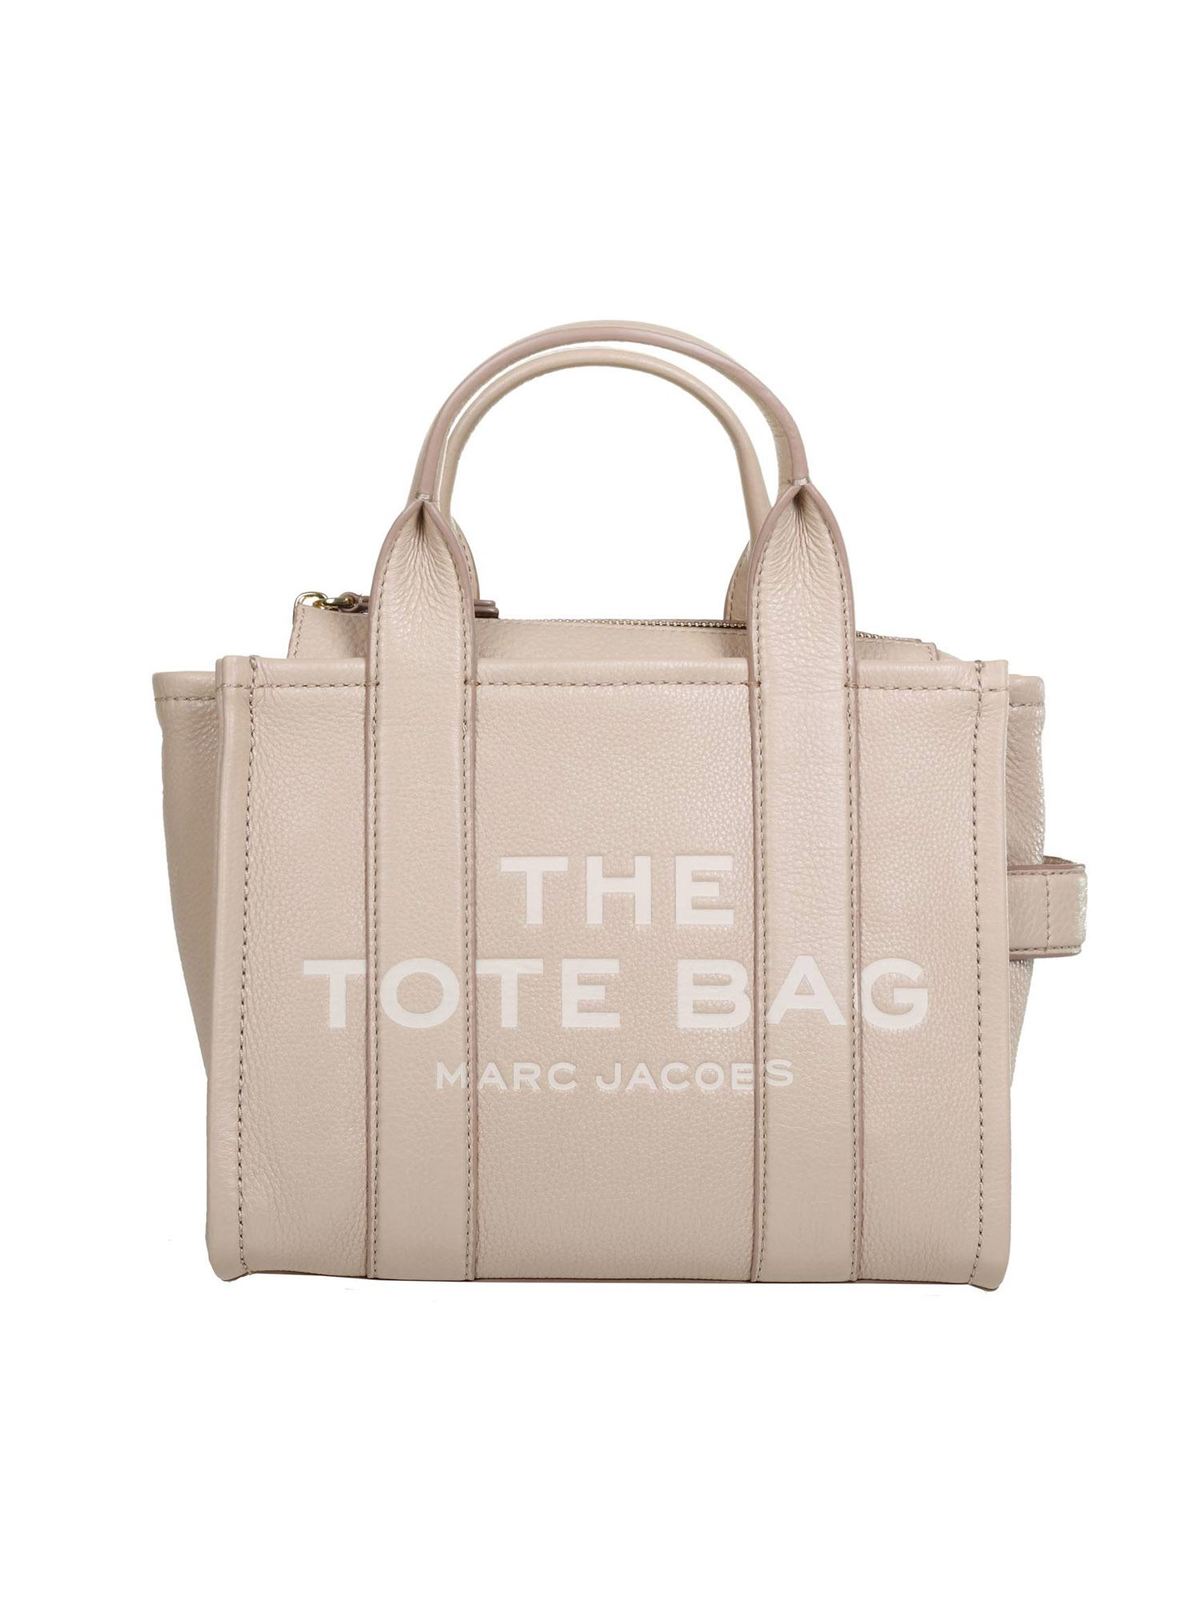 MARC JACOBS MINI TRAVELER TOTE BAG IN TWINE COLOR